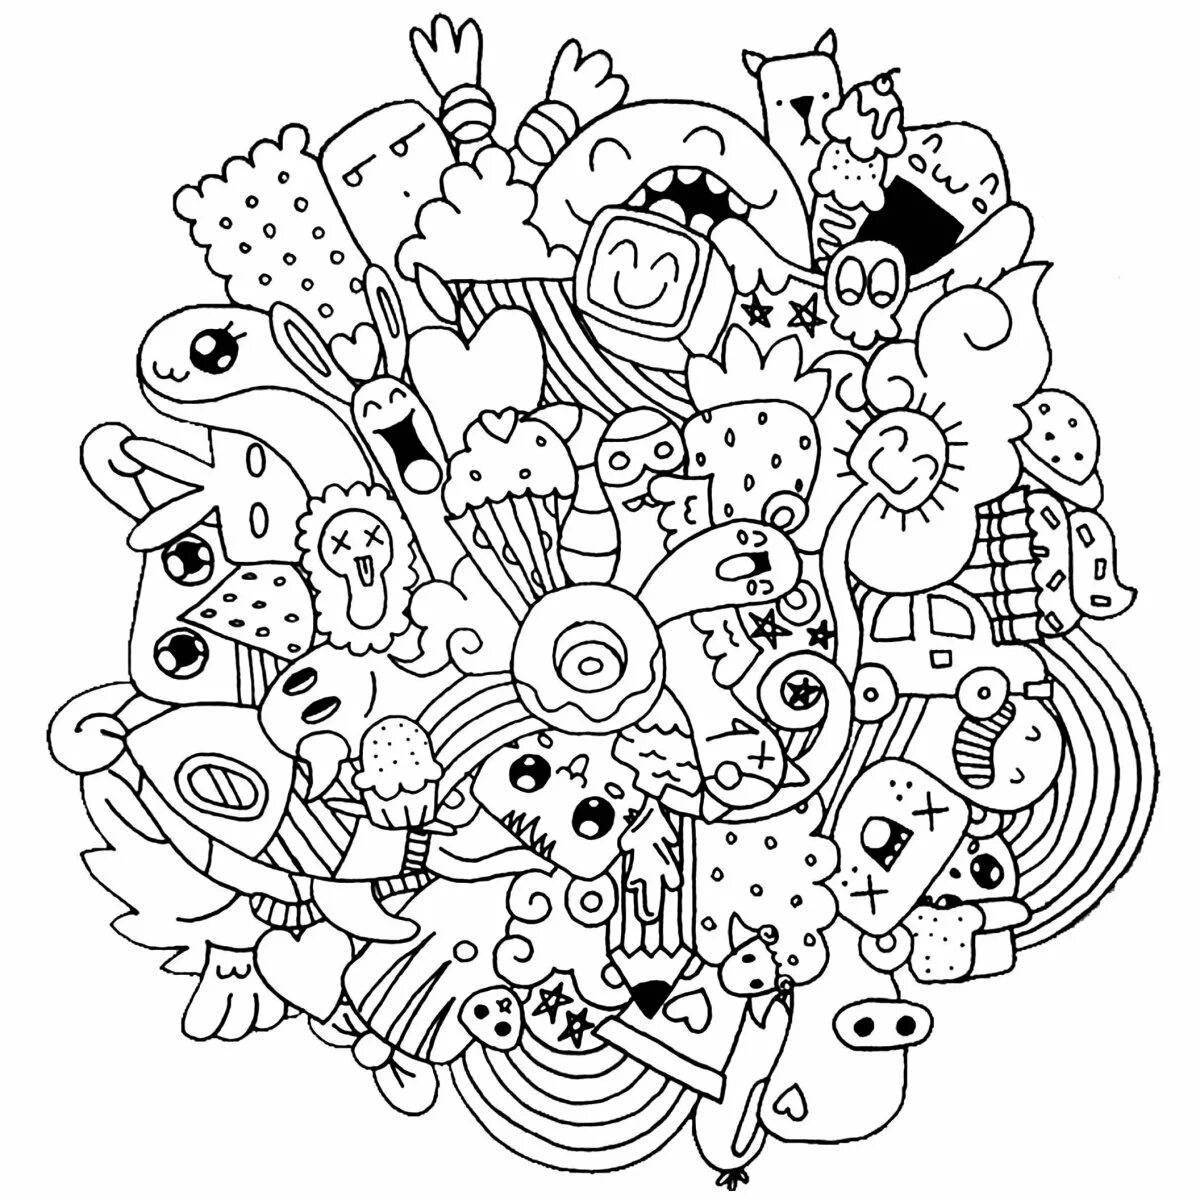 Colourful anti-stress coloring book for teenagers